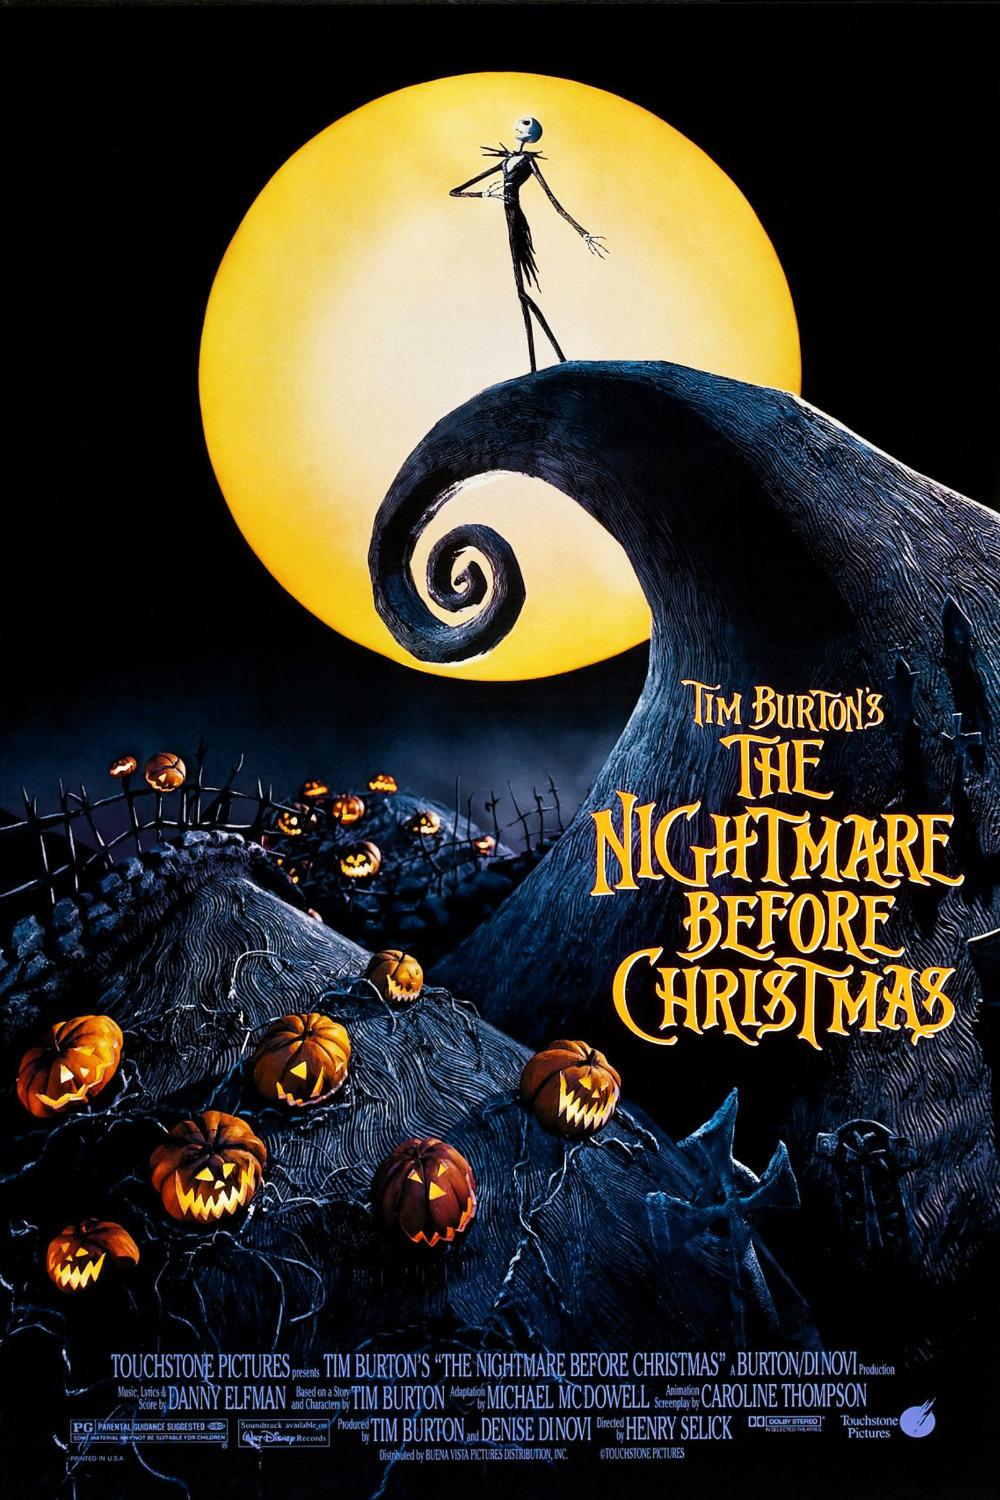 The Nightmare Before Christmas: This unexpected Halloween-Christmas crossover is a stunning stop-motion masterpiece that has aged remarkably well. Tim Burton's distinctive vision captures Jack Skellington's desire for Christmas, reflecting a relatable feeling of not quite getting it right.